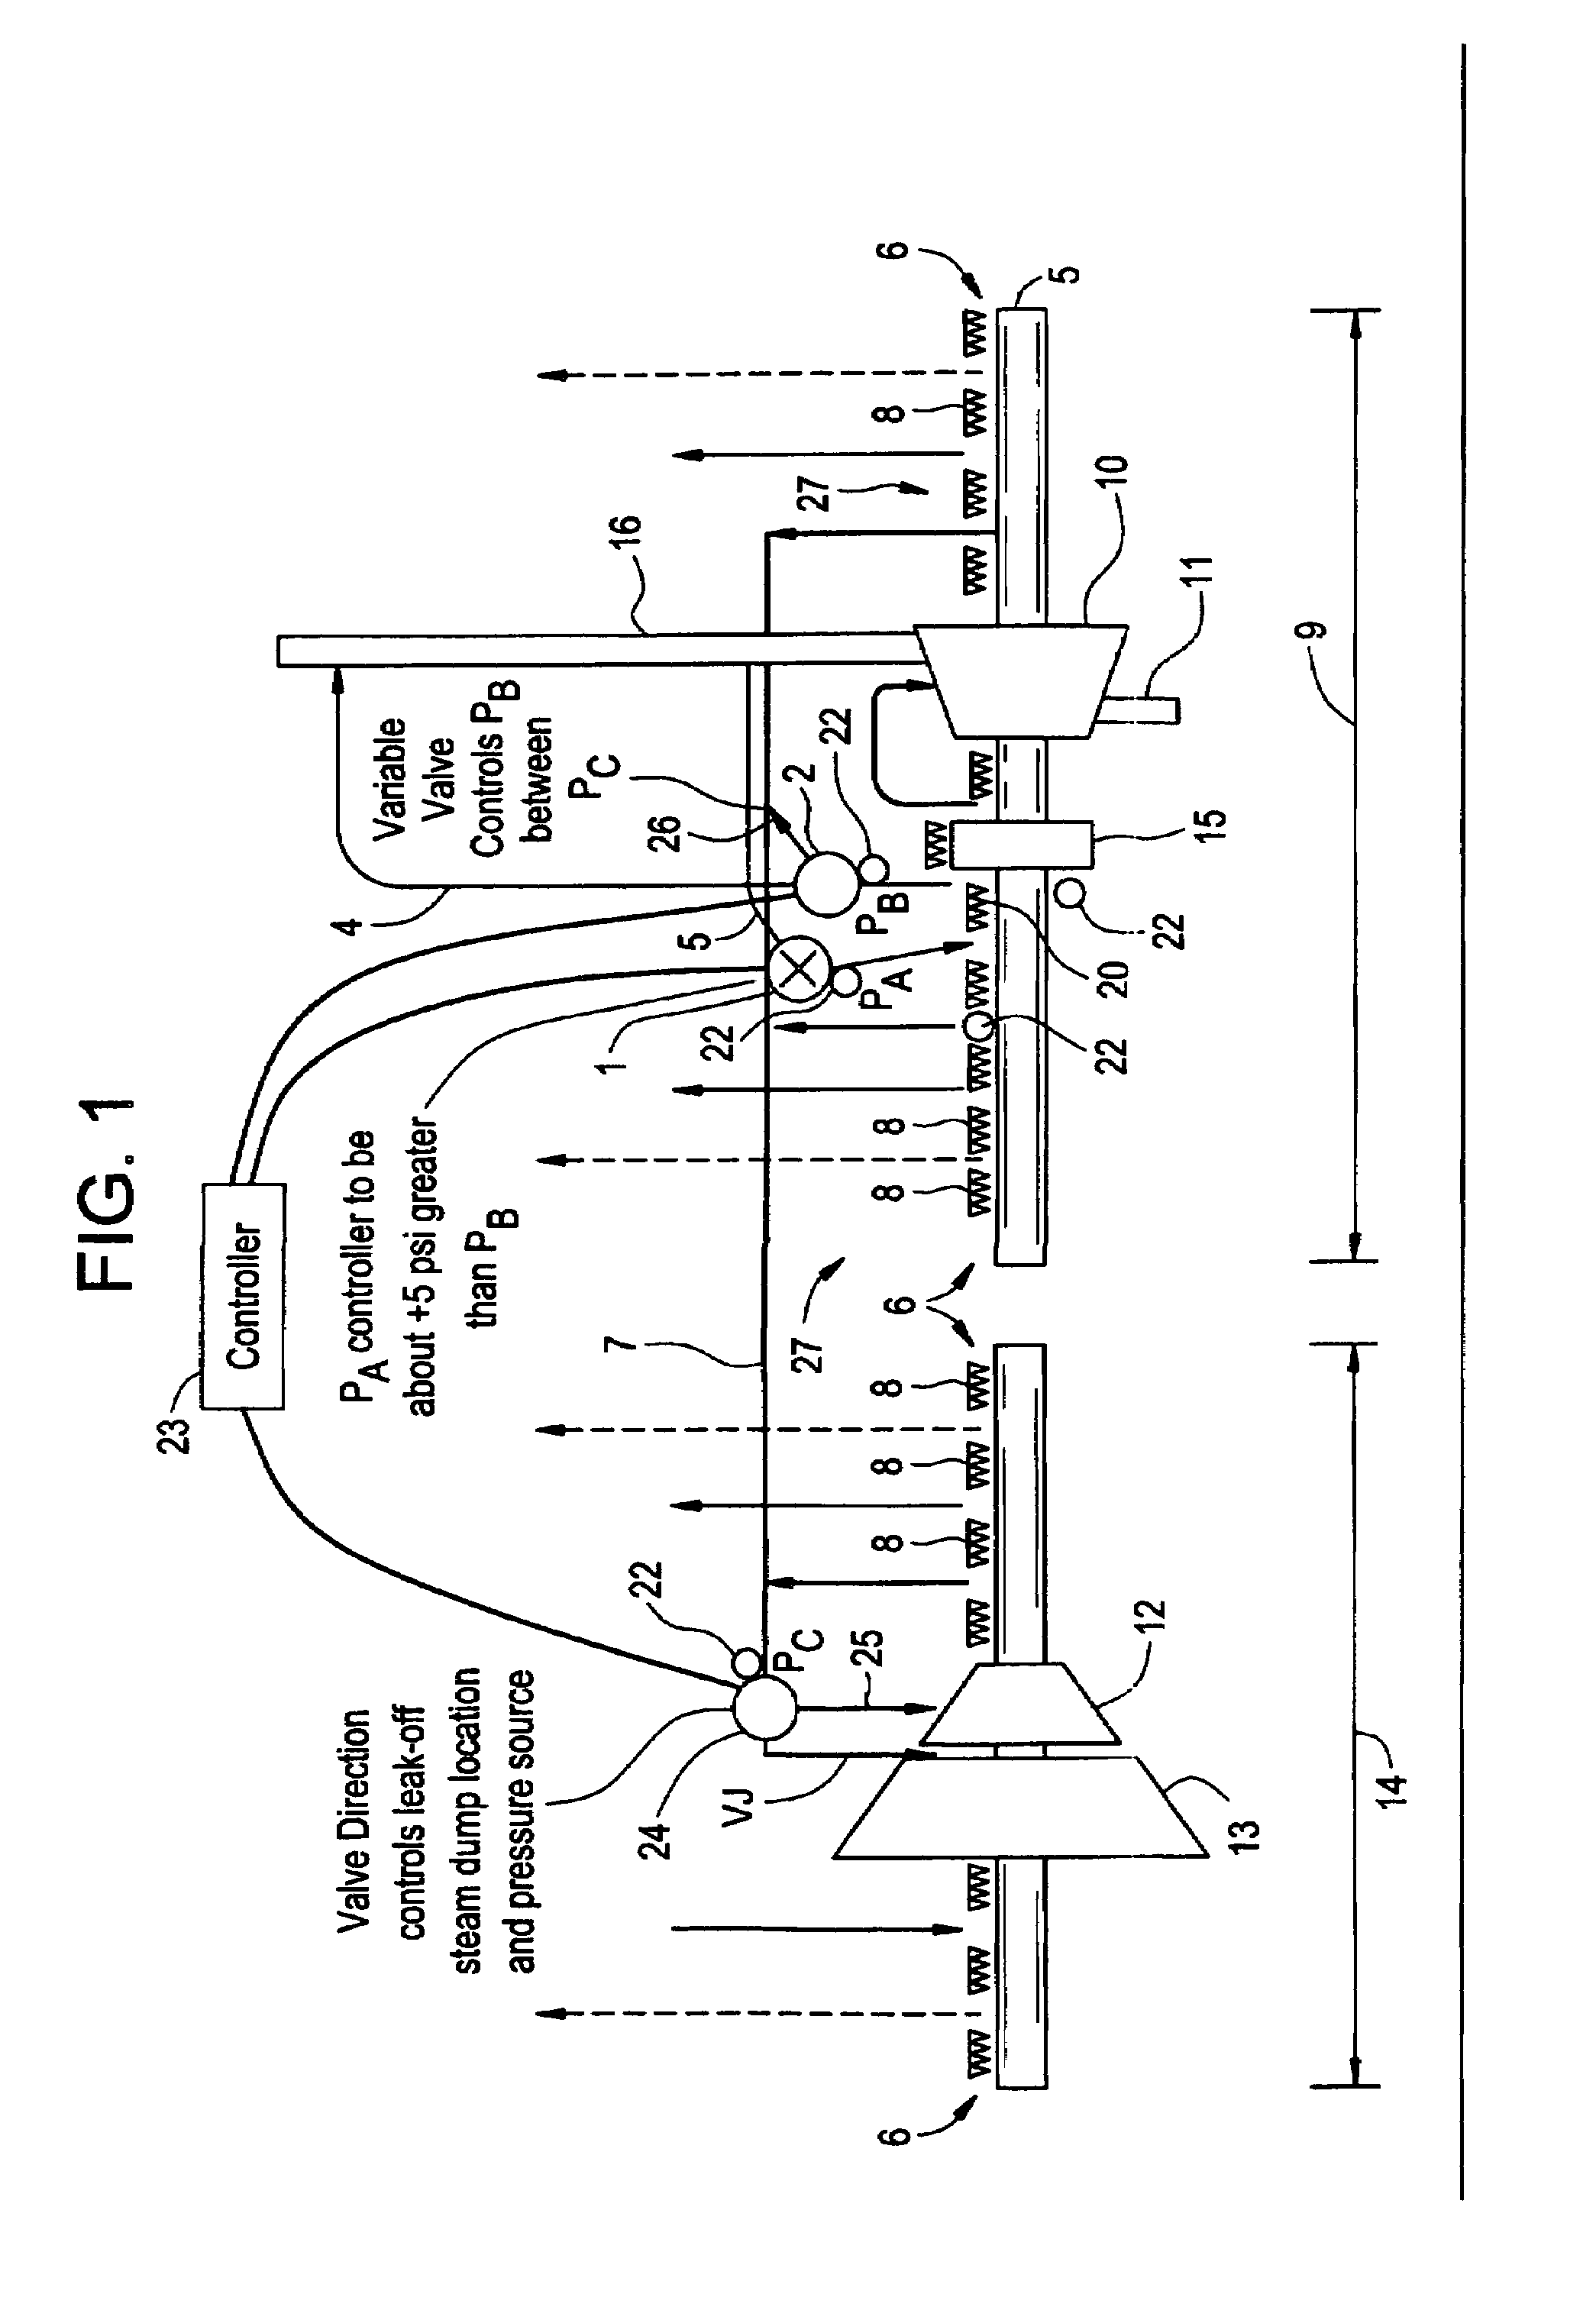 Variable pressure-controlled cooling scheme and thrust control arrangements for a steam turbine